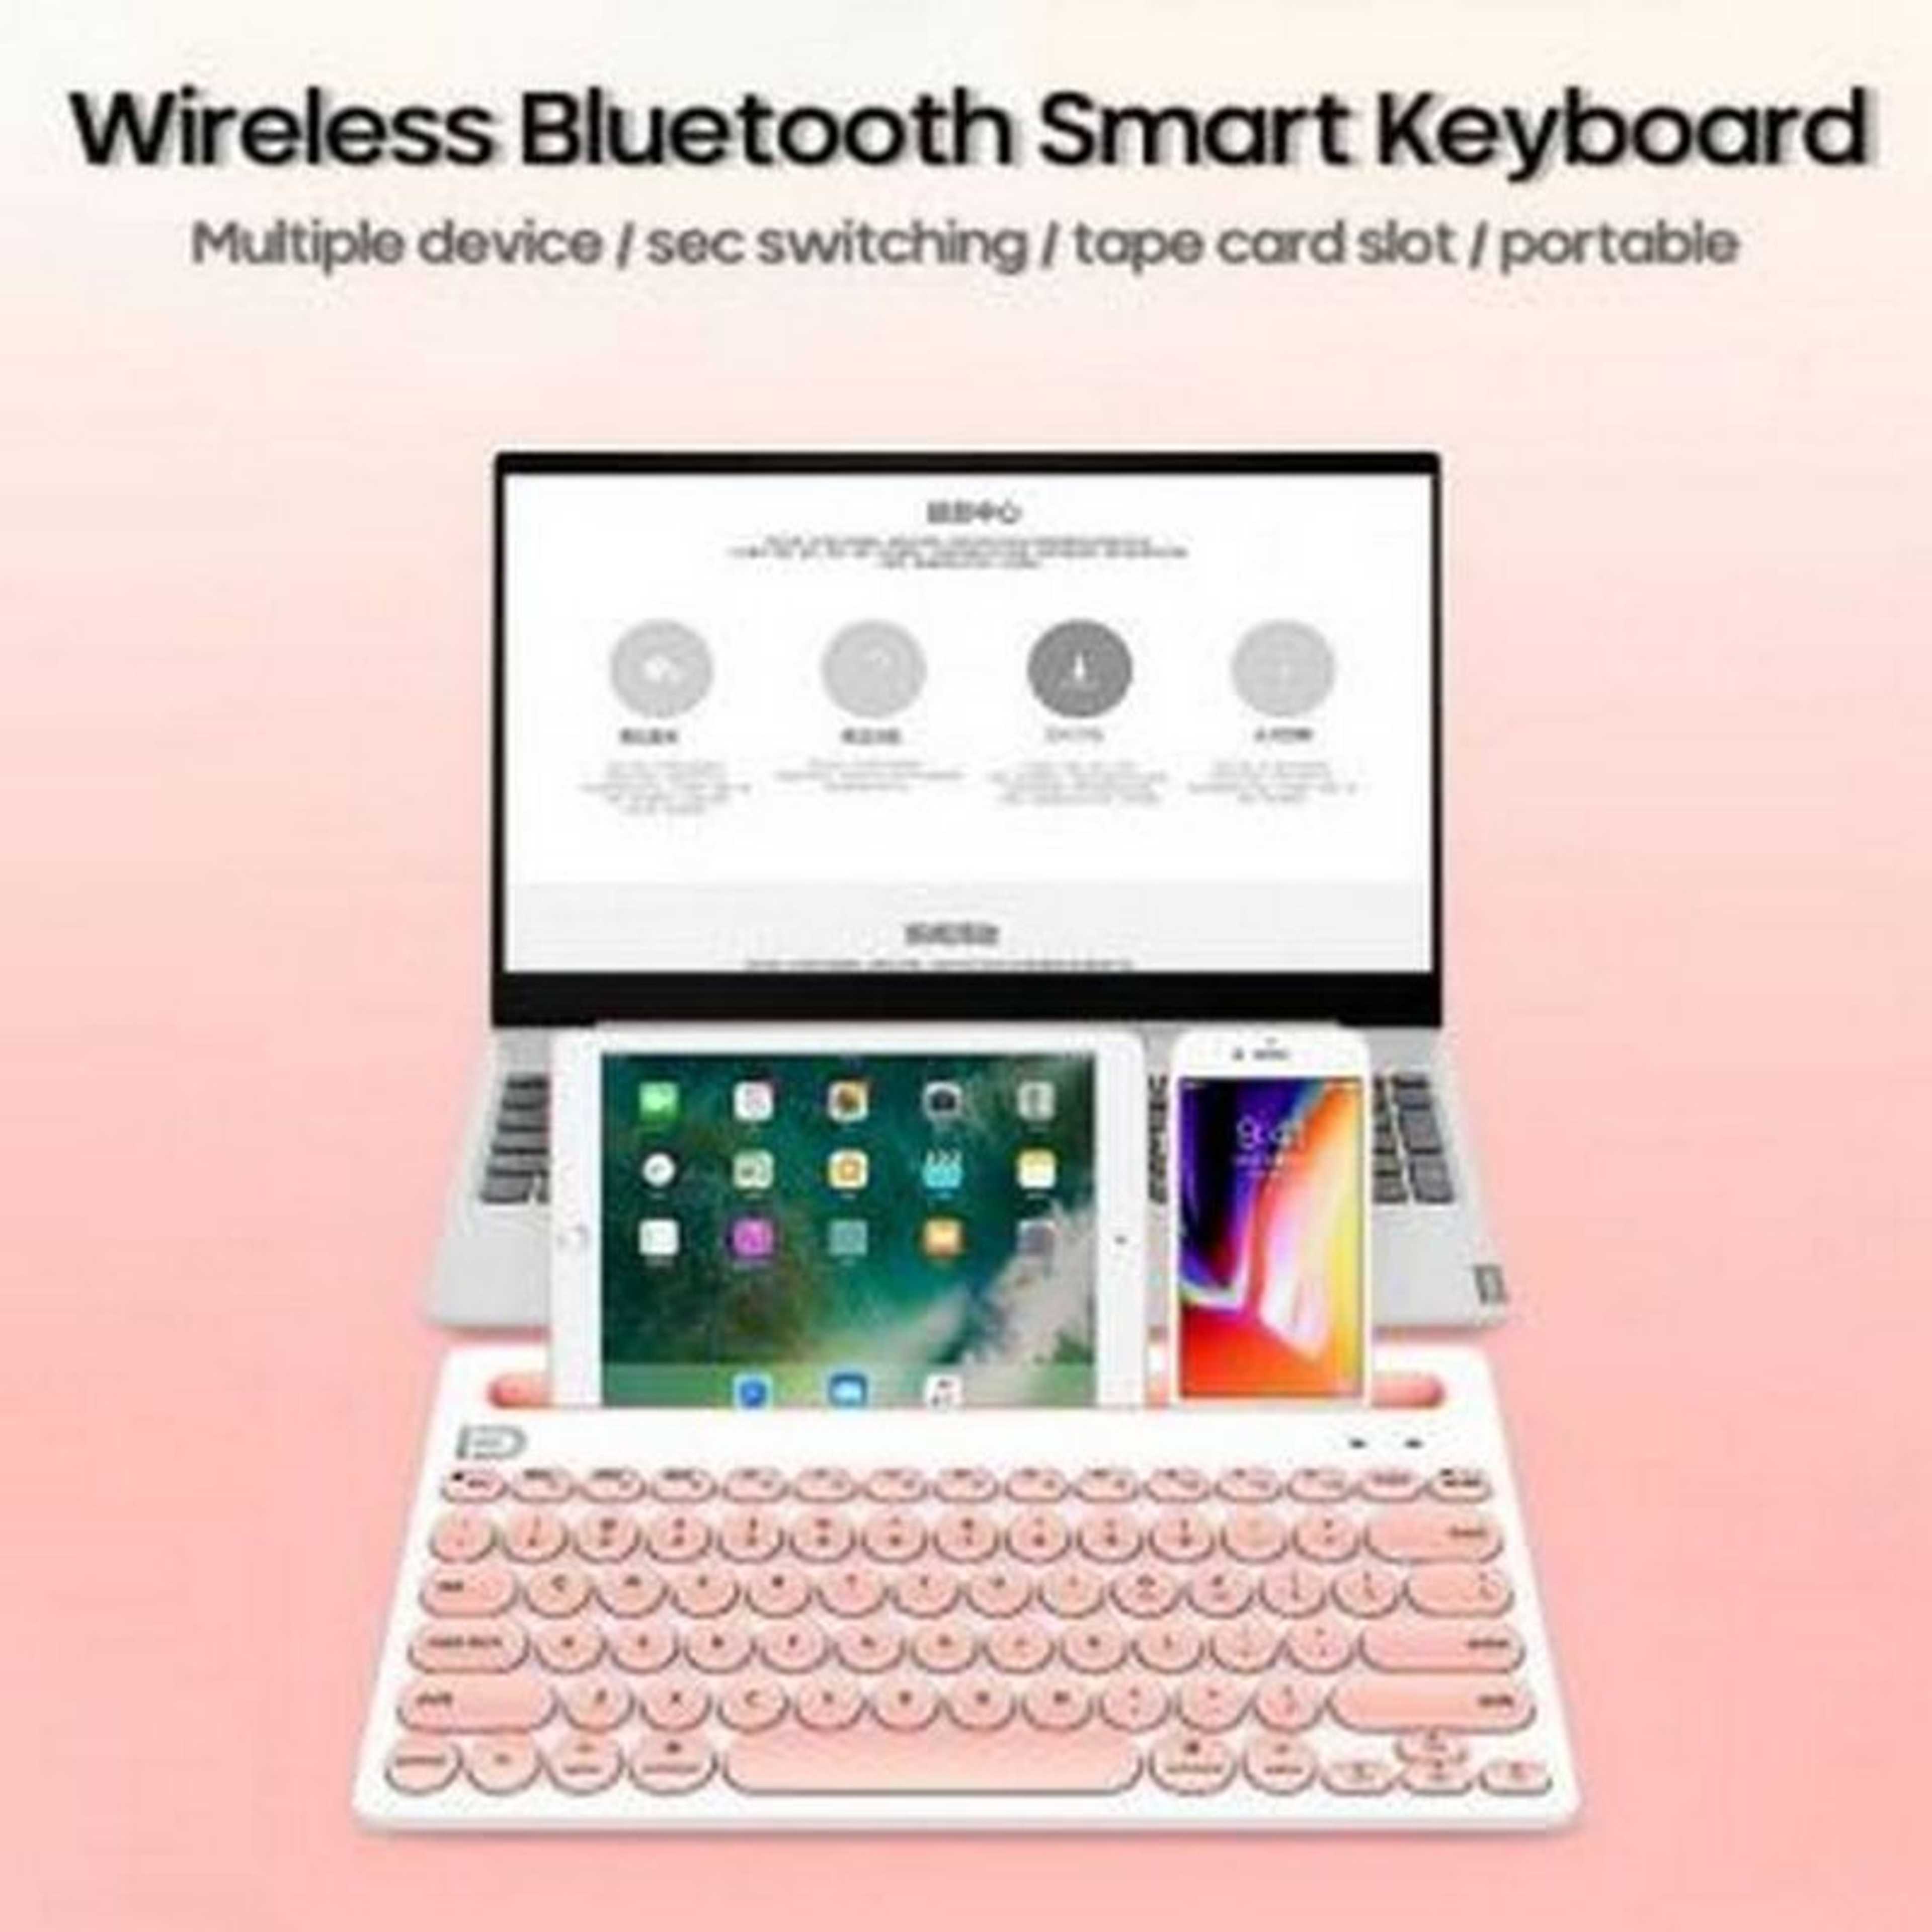 79 Keys Portable Slim Bluetooth Wireless Keyboard With Tablet & Phone Holder, Multi-Device Universal Cute Wireless Bluetooth Keyboard Portable Slim with 20m Connection Distance for Tablet Smart Phone PC Windows Android iOS Mac